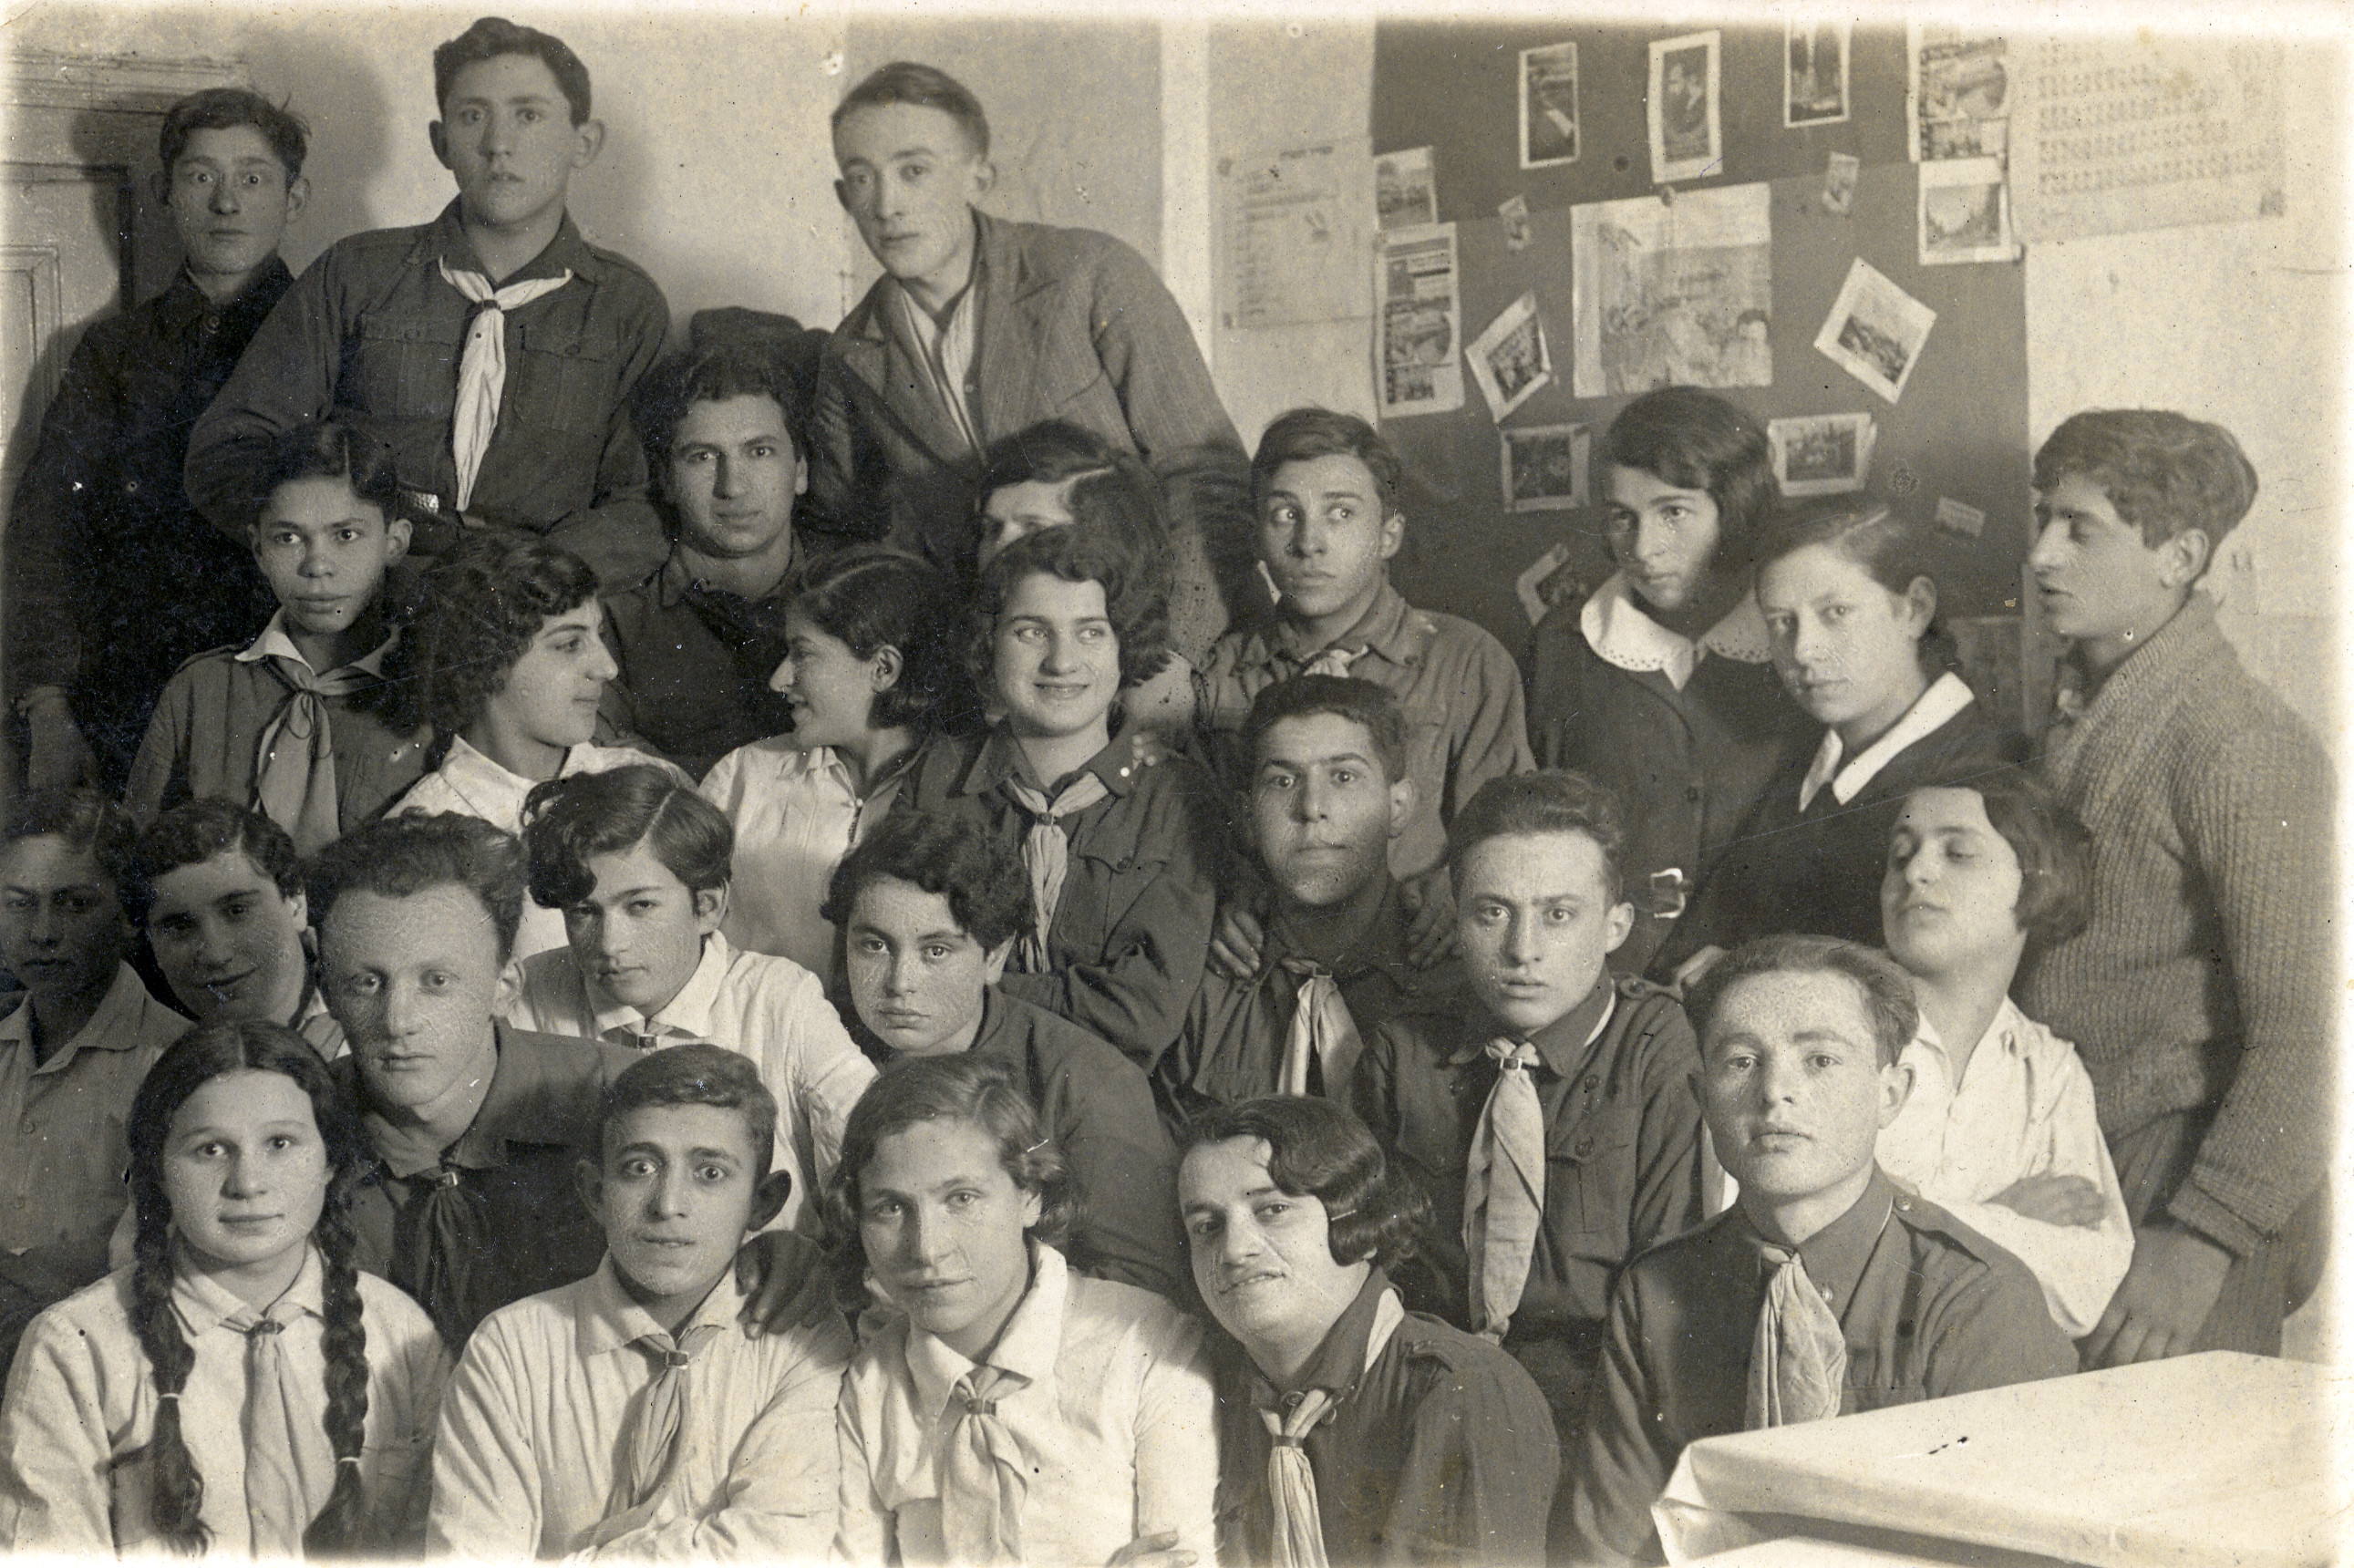 Portrait of the Hanoar Hazioni Zionist youth group members in Lida.

Among those pictured is Sheyna Muller (middle row, second from the right, with white collar).